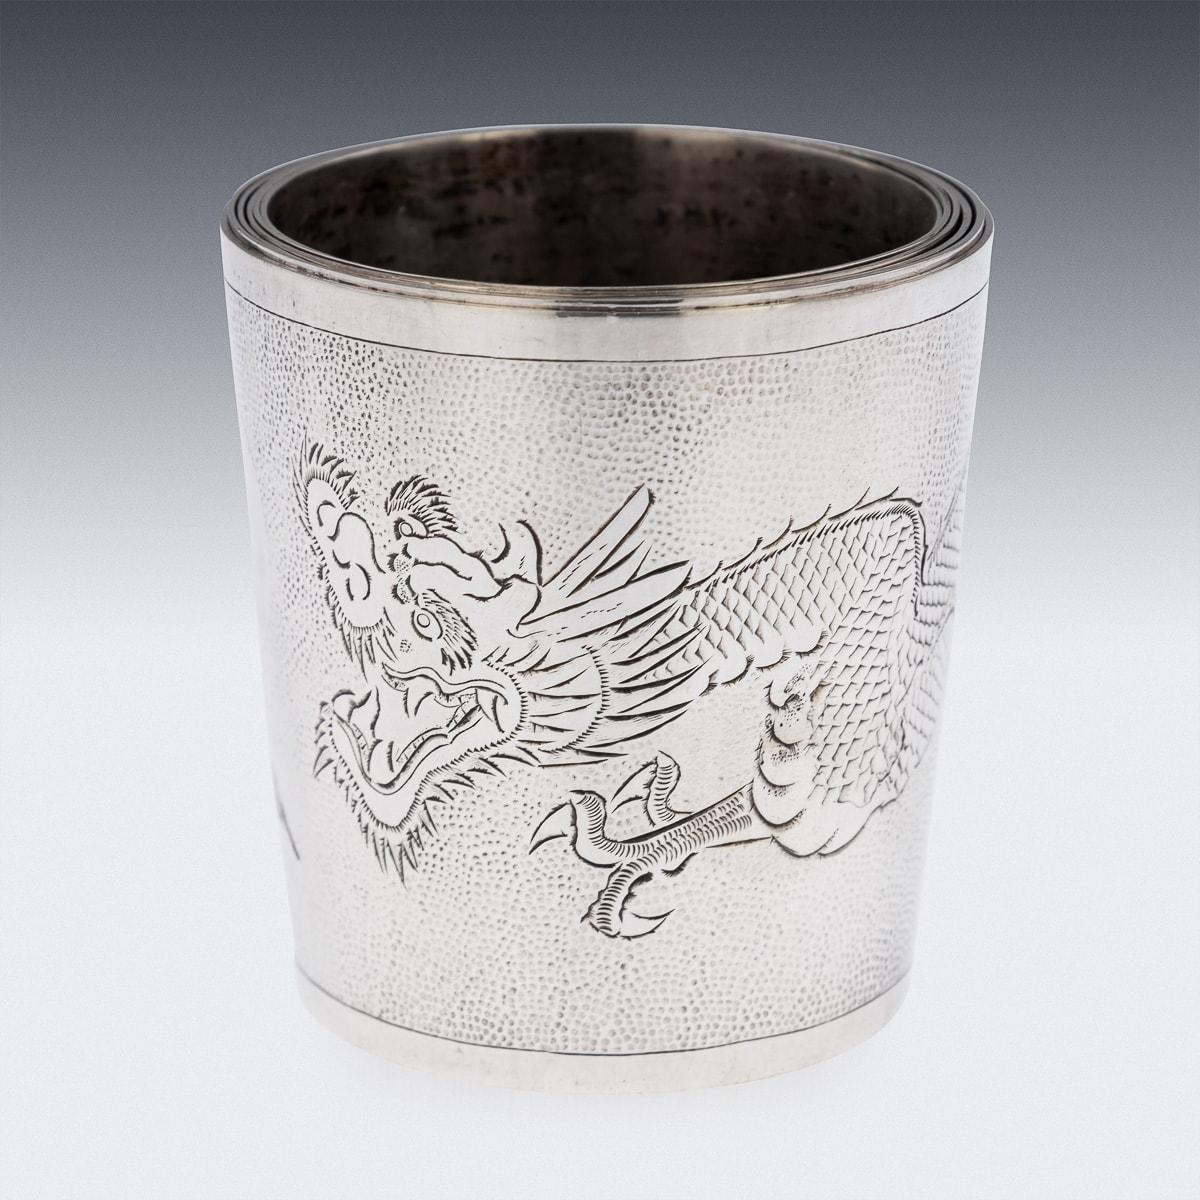 Antique 20th Century Chinese solid silver set of six stackable cased cups with leather pouch. The cups with a smooth top rim, a hand beaten hammer effect with a dragon which encircles the body. The underside of each cup is smooth and stamped with